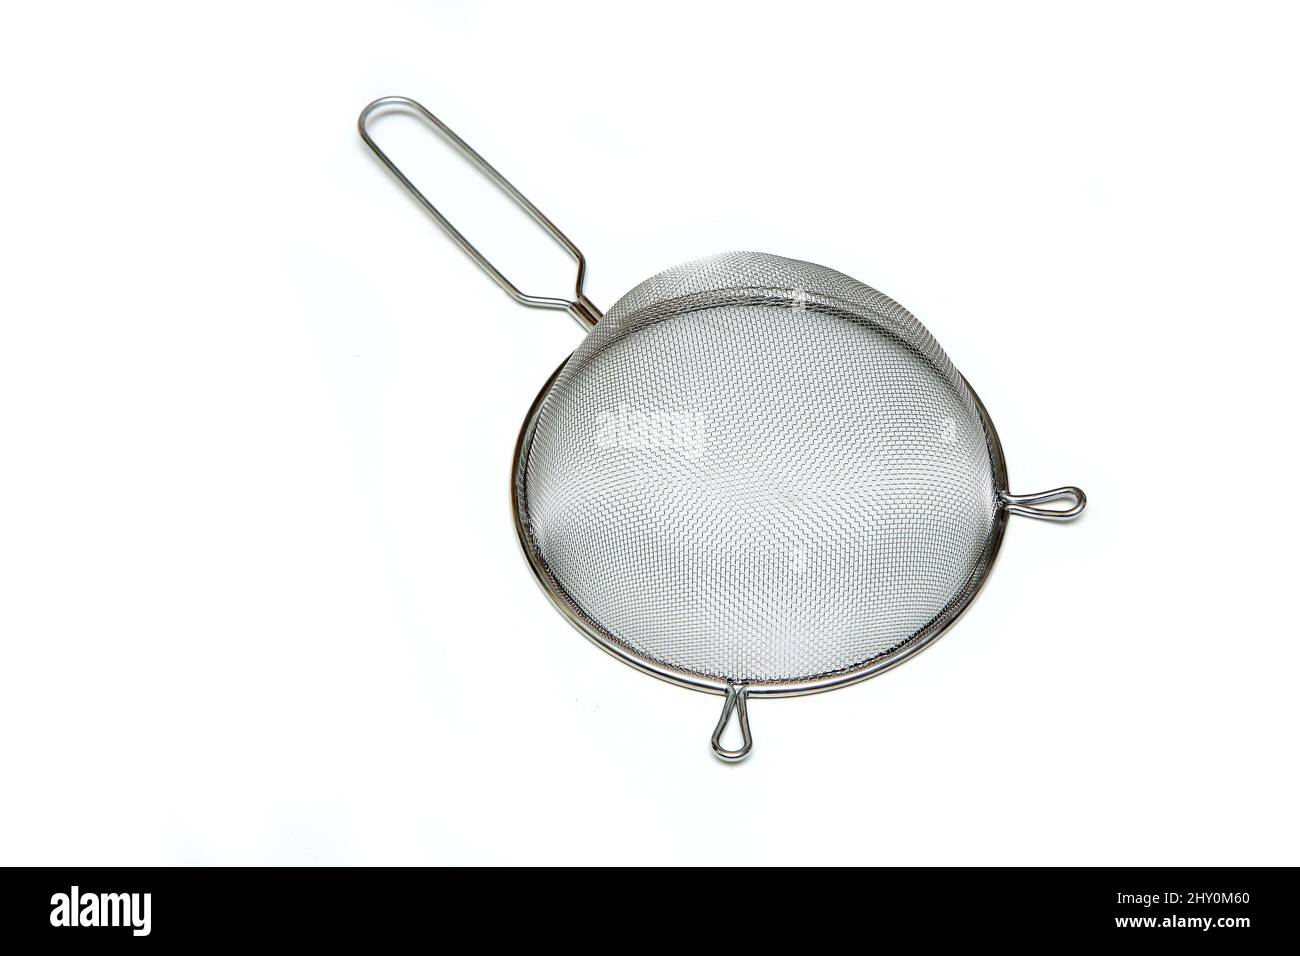 The simple new stainless strainer isolated in a white background. Stock Photo